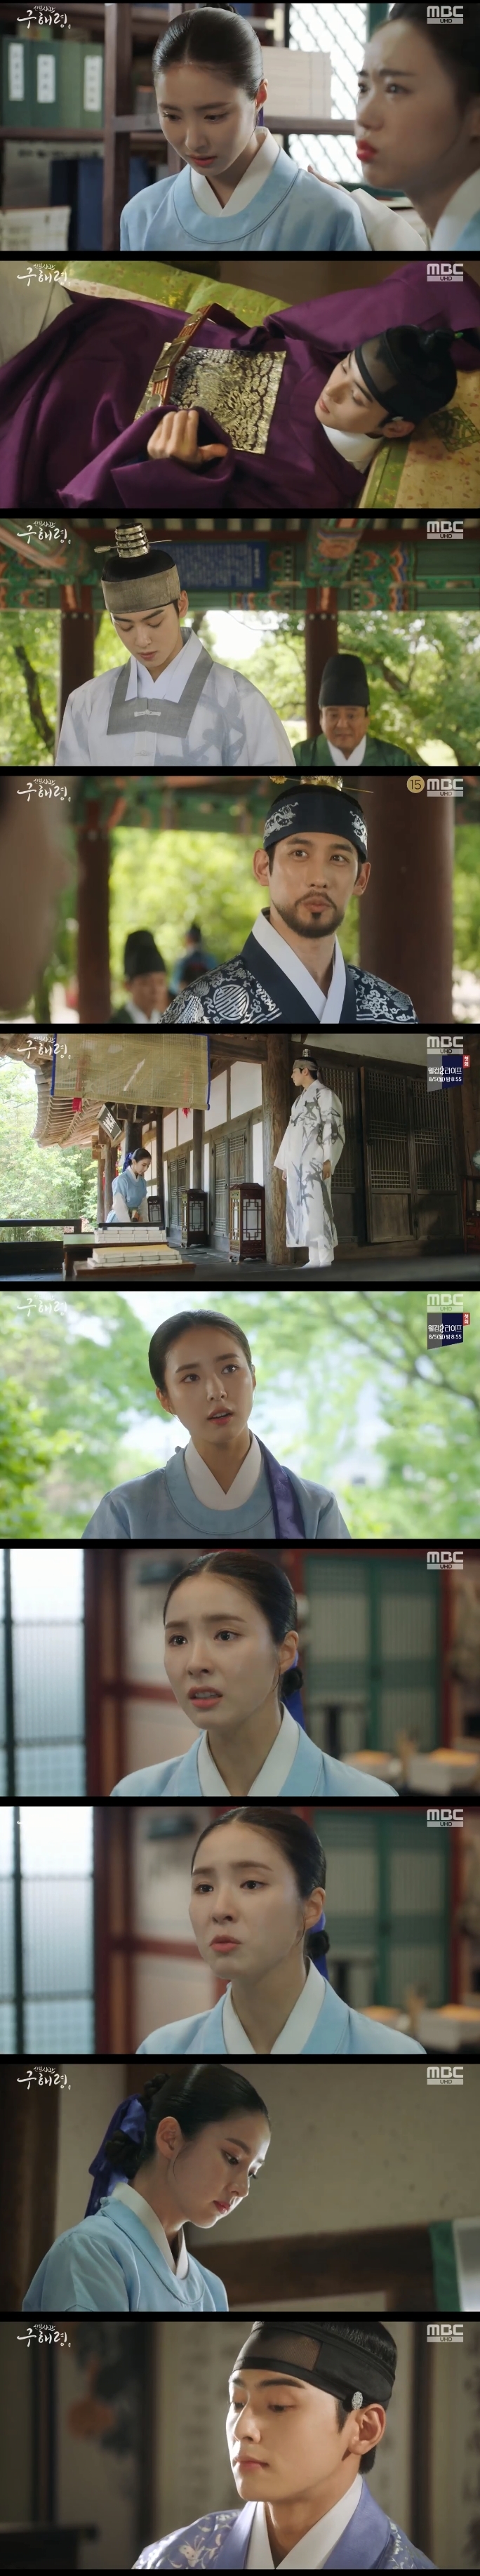 Na Hae-ryung, the new officer said, Jung Eun-woo warmly comforted Shin Se-kyung.In the MBC drama Na Hae-ryung (played by Kim Ho-soo, directed by Kang Il-soo Han Hyun-hee), which was broadcast on the 31st, Koo Na Hae-ryung (Shin Se-kyung) was shown to know that Lee Rim (Cha Jung Eun-woo) is a Daewon army.On this day, Lee Lim said, I am the prince of the Joseon Dynasty in this country. Can you really hurt me?At this time, Na Hae-ryung overheard the conversation of Irim.In addition, Irim fell unconscious after the sick man disappeared. Na Hae-ryung moved the sick to a medicine room and nursed him.The next day, Na Hae-ryung met with Irim as a cadet, and Irim was forced to reveal his identity; Na Hae-ryung recited lowly, saying, I wished I hadnt.In particular, Na Hae-ryung began to draw a line on Irim, who told Na Hae-ryung, I wanted to say thank you.I dont know why you were there last night, but you didnt turn away from me. Thank you for caring. I wanted to say that.Eventually, Na Hae-ryung said, I thought maybe I could be a friend.I wish I could have a man who could be comfortable in this large palace, even if it was not a good start.Why did not you tell me before? Later, Na Hae-ryung wrote an appeal about not receiving the green bar properly, which led to another official coming to the house and angry at the old Na Hae-ryung.Na Hae-ryung headed to the melt-down party with a heavy heart, and Irim asked, What is going on?Although Koo tried to pretend to be nonchalant, Irim said, Its okay to cry, its a place where no one finds it, no one will hear it.So it is okay to cry even if you cry out loud. Irim quietly moved away, and Na Hae-ryung was alone and shed tears of tears of life.=